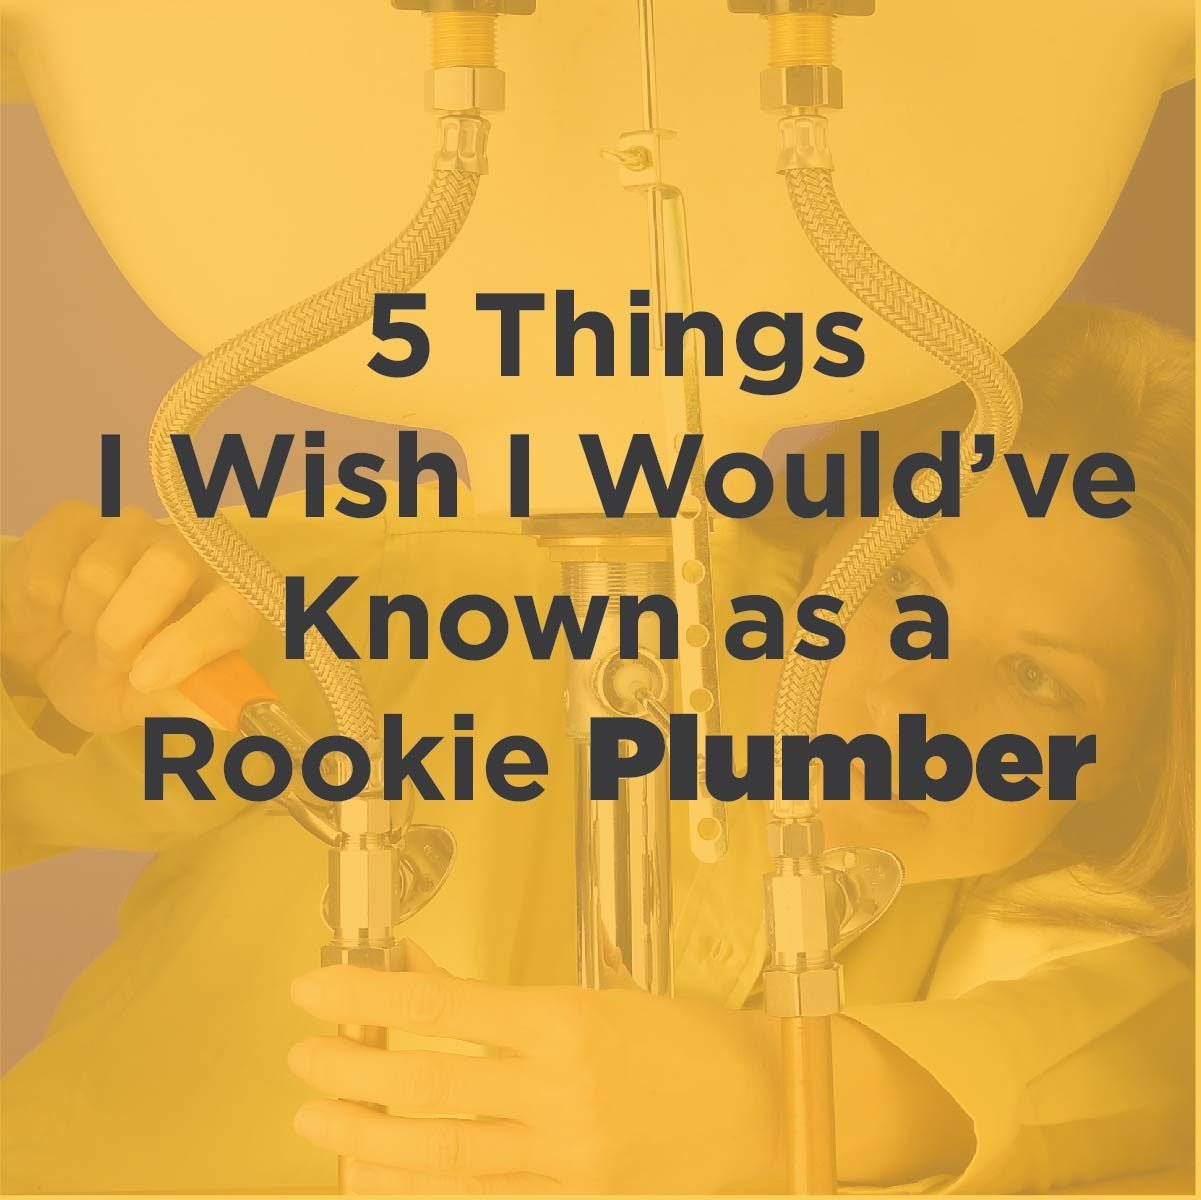 5 Things I Wish I Would Have Known as a Rookie Plumber